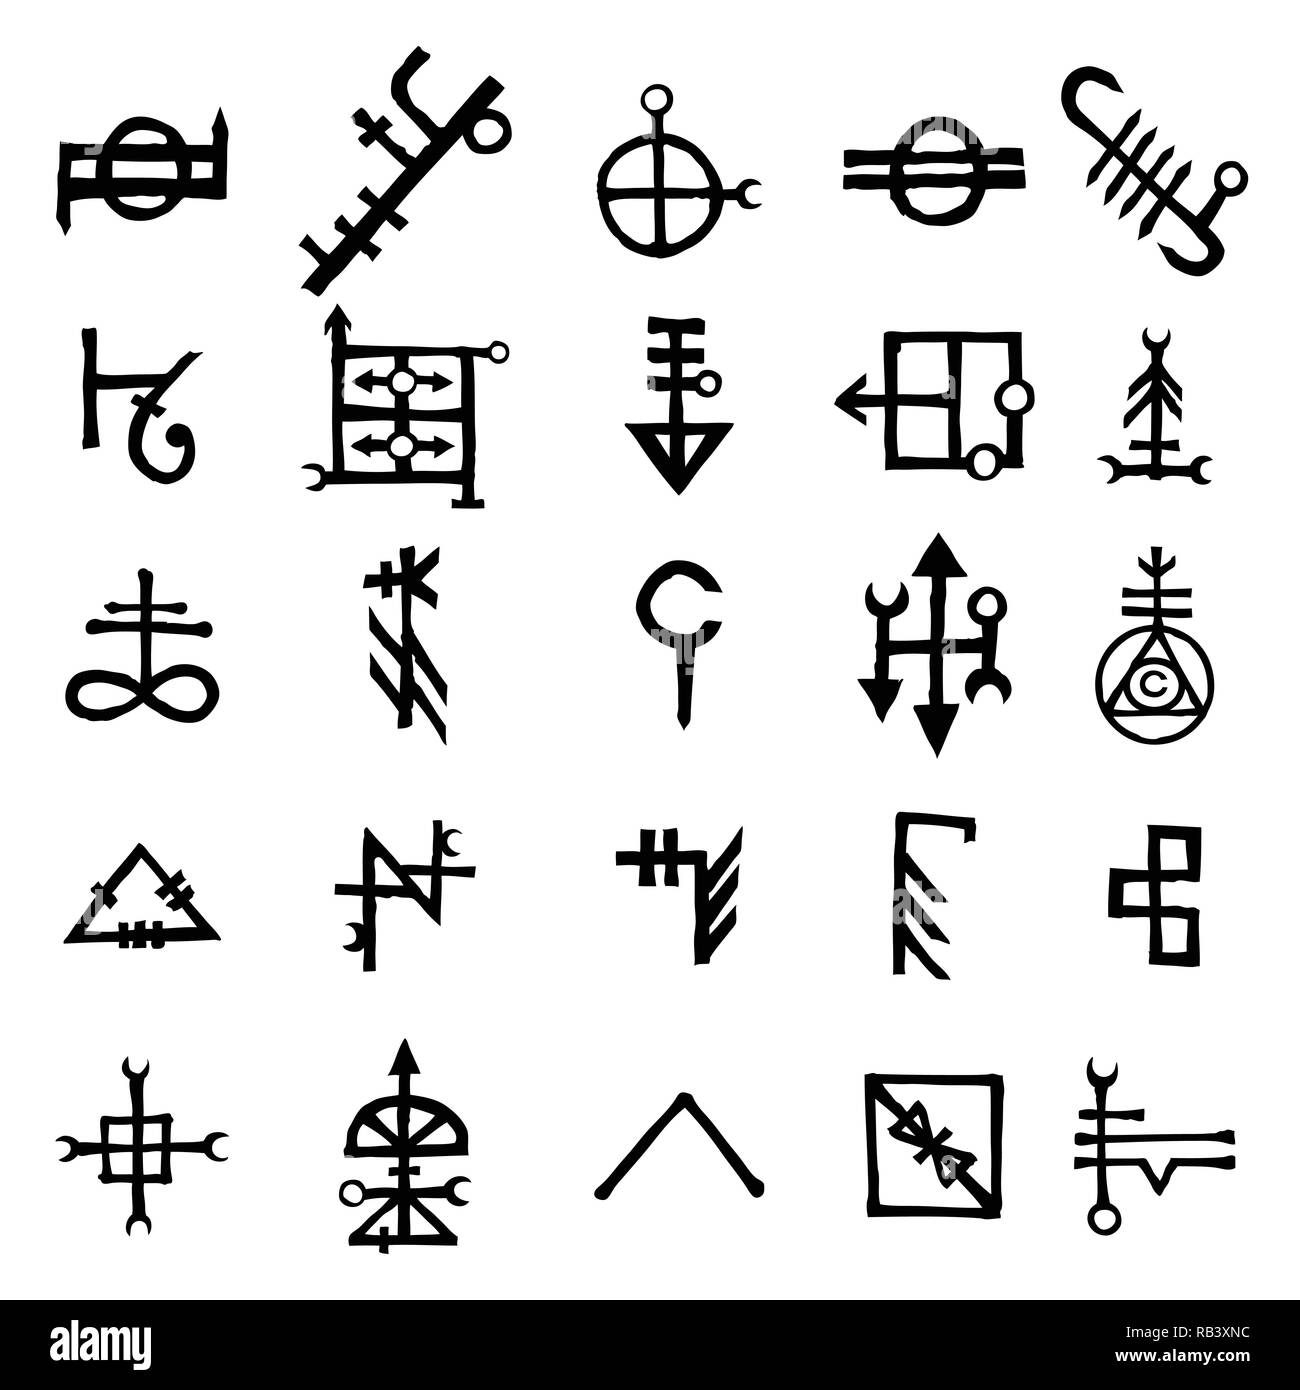 Set of alchemical symbols isolated on white background. Hand drawn and written elements for signs design. Inspiration by mystical, esoteric, occult th Stock Vector